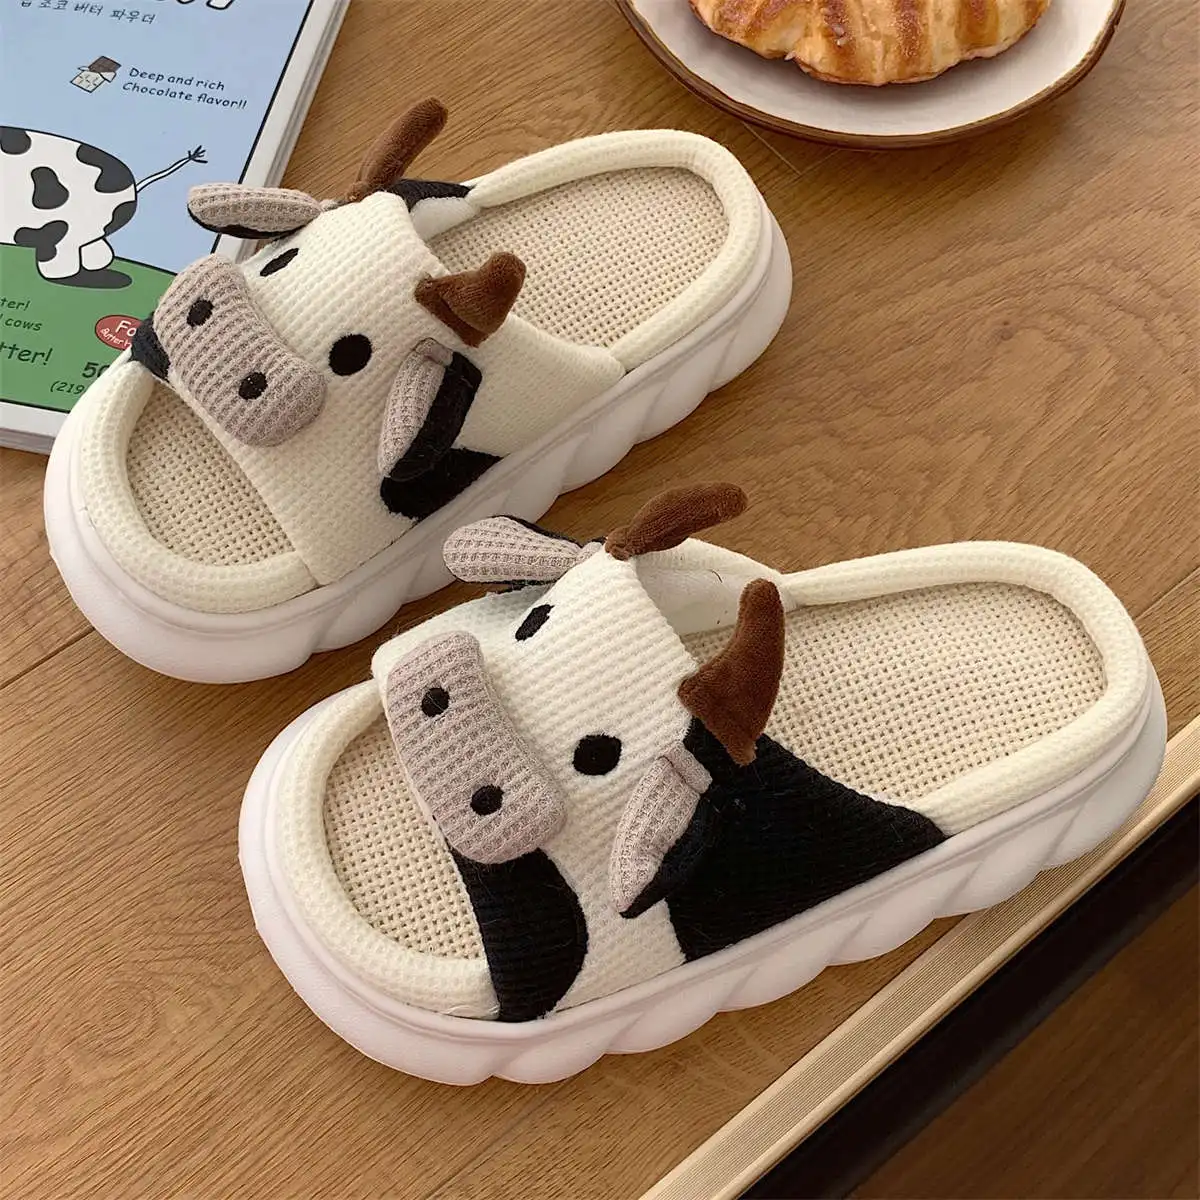 2022 Women's Slippers Summer Four Seasons Indoor Home Sandals and Slippers Cute Cartoon Milk Cow House Slippers Funny Shoes